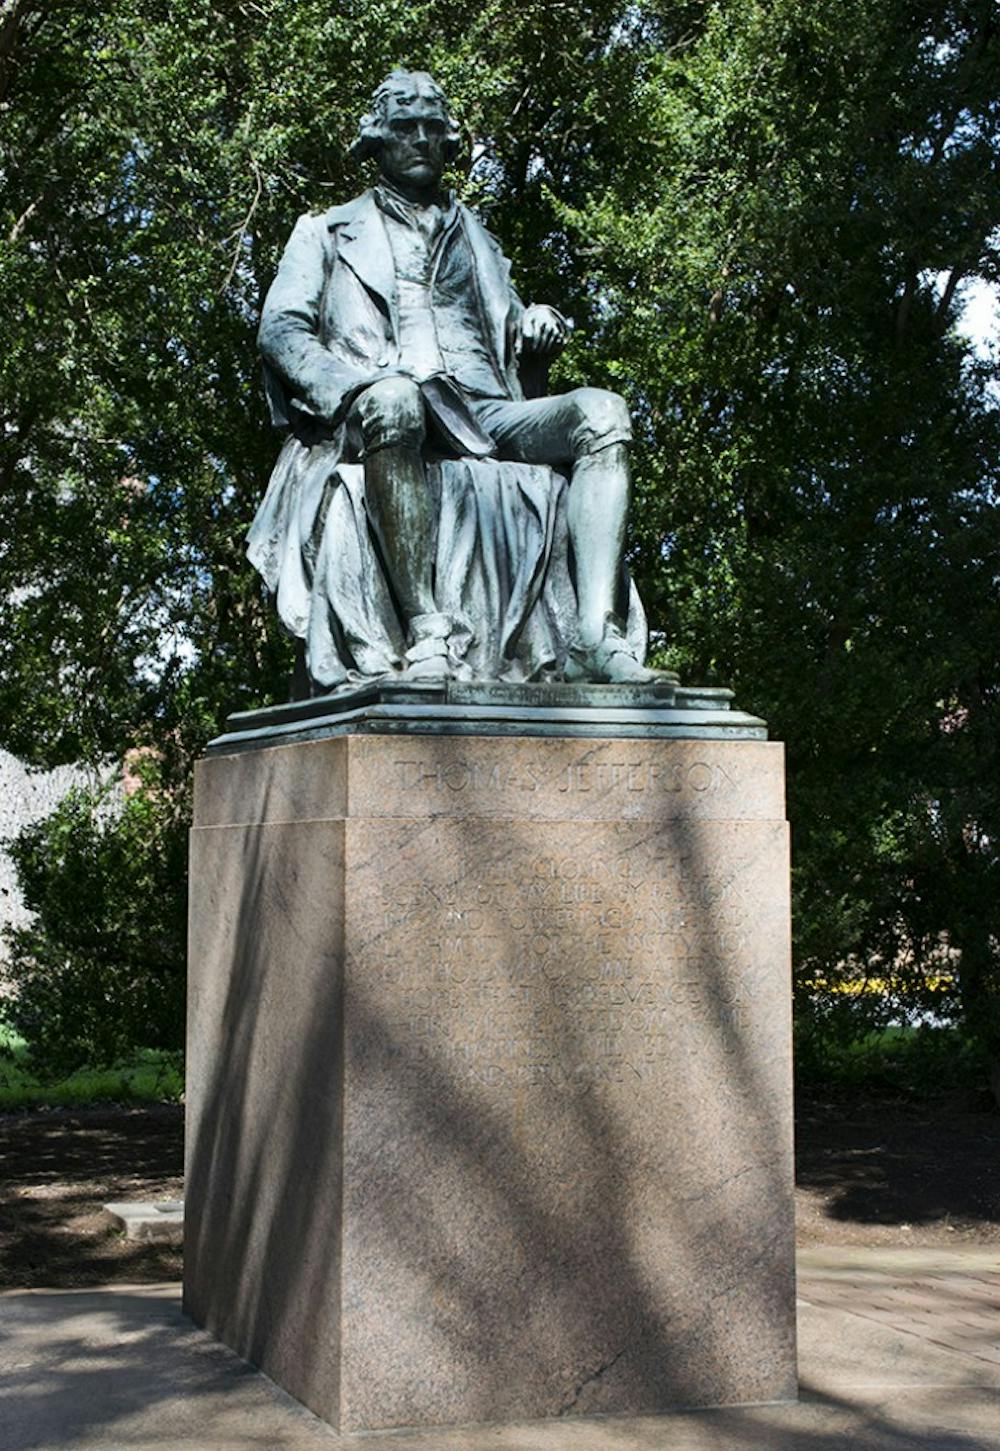 Students encounter representations of the University's founder everyday, whether it be walking past statues modeled after Jefferson or hearing his name mentioned in a class.